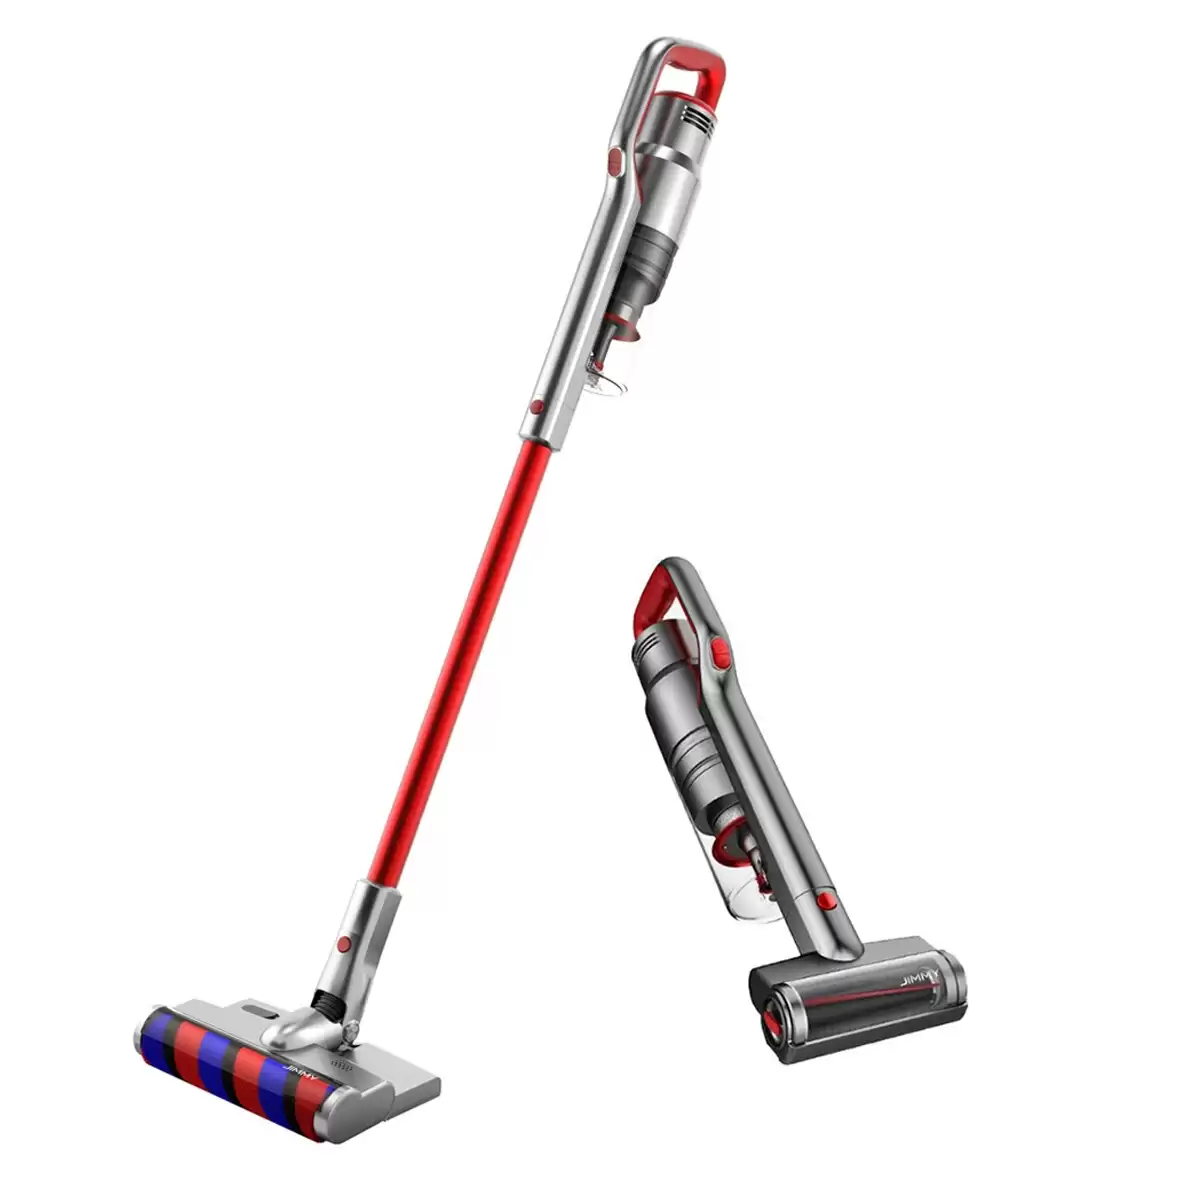 Order In Just $199.99 Jimmy Jv65 Handheld Cordless Stick Vacuum Cleaner 22000pa Suction Power Vacuuming And Mopping Dust Collector Digital Motor 145aw Lightweight For Home Hard Floor Carpet Car Pet With This Coupon At Banggood